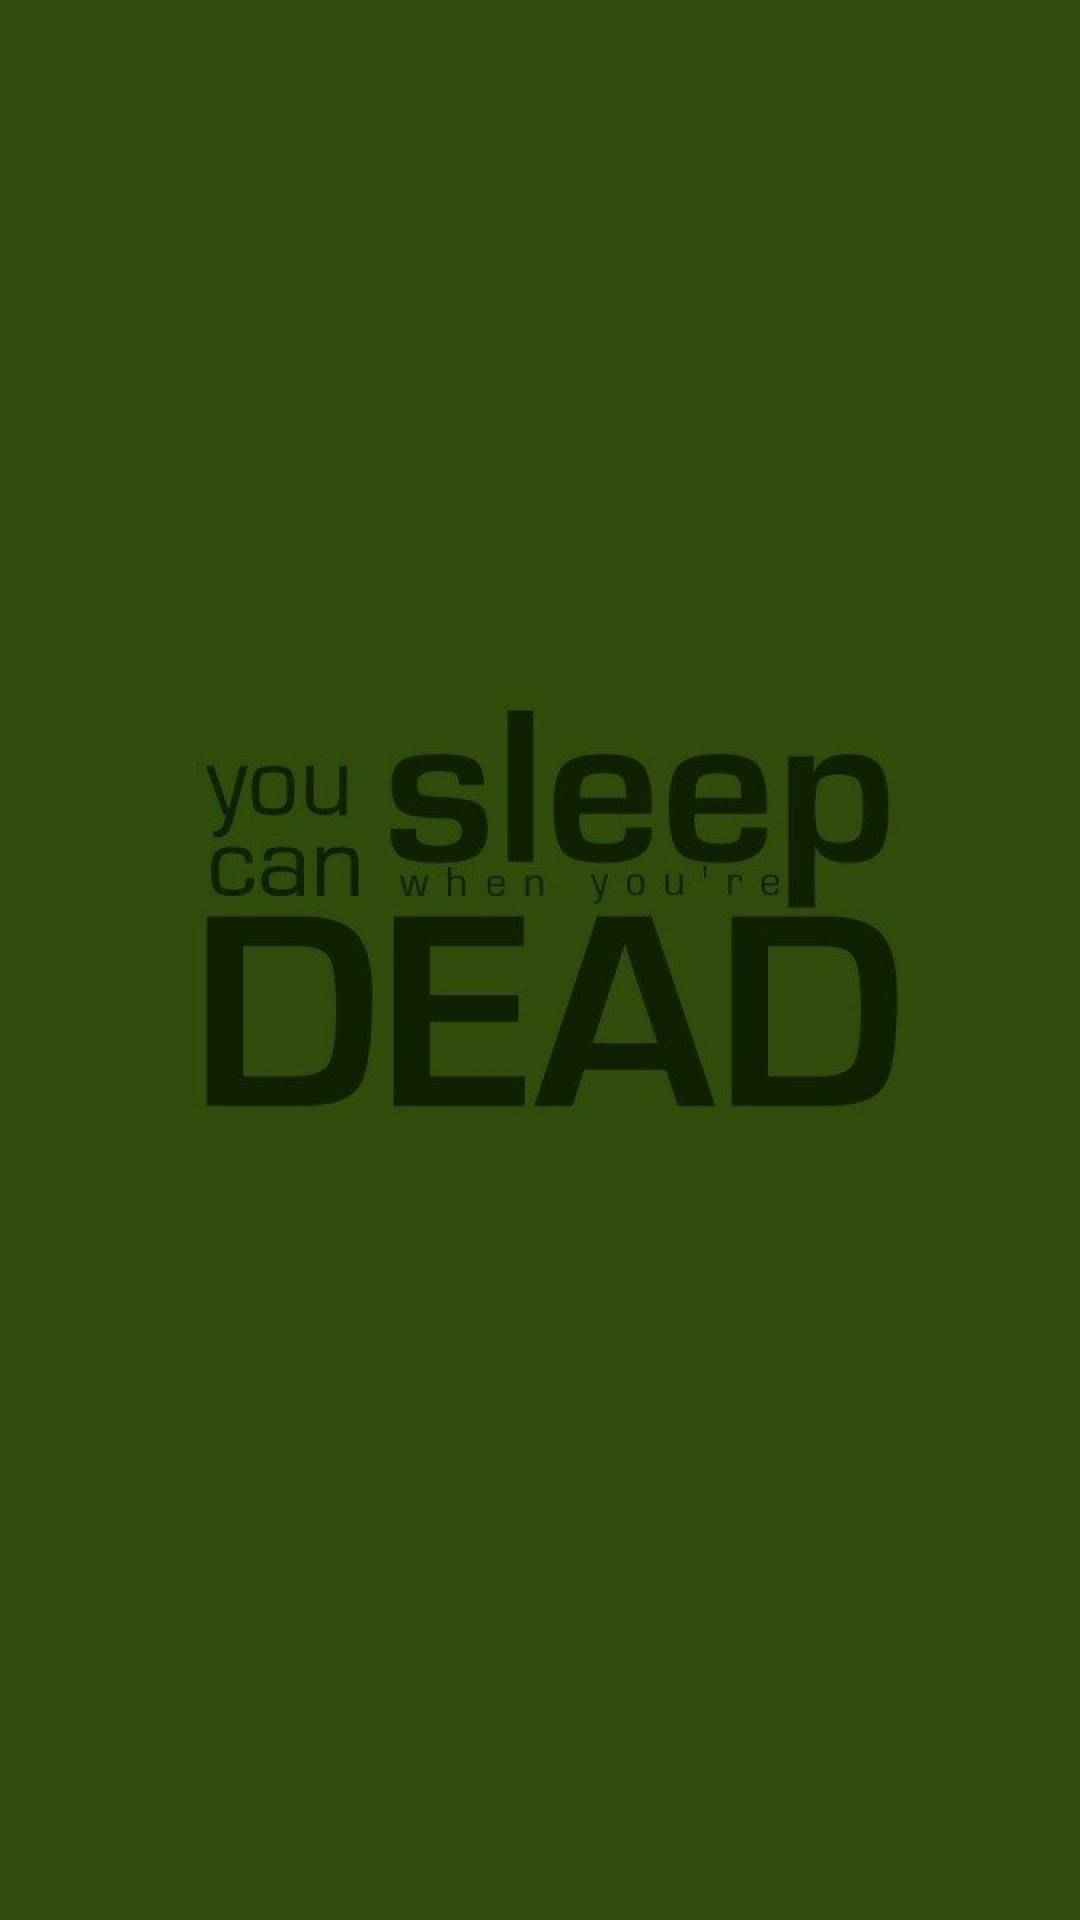 Sleep When You’re Dead Quote Plain Green Background